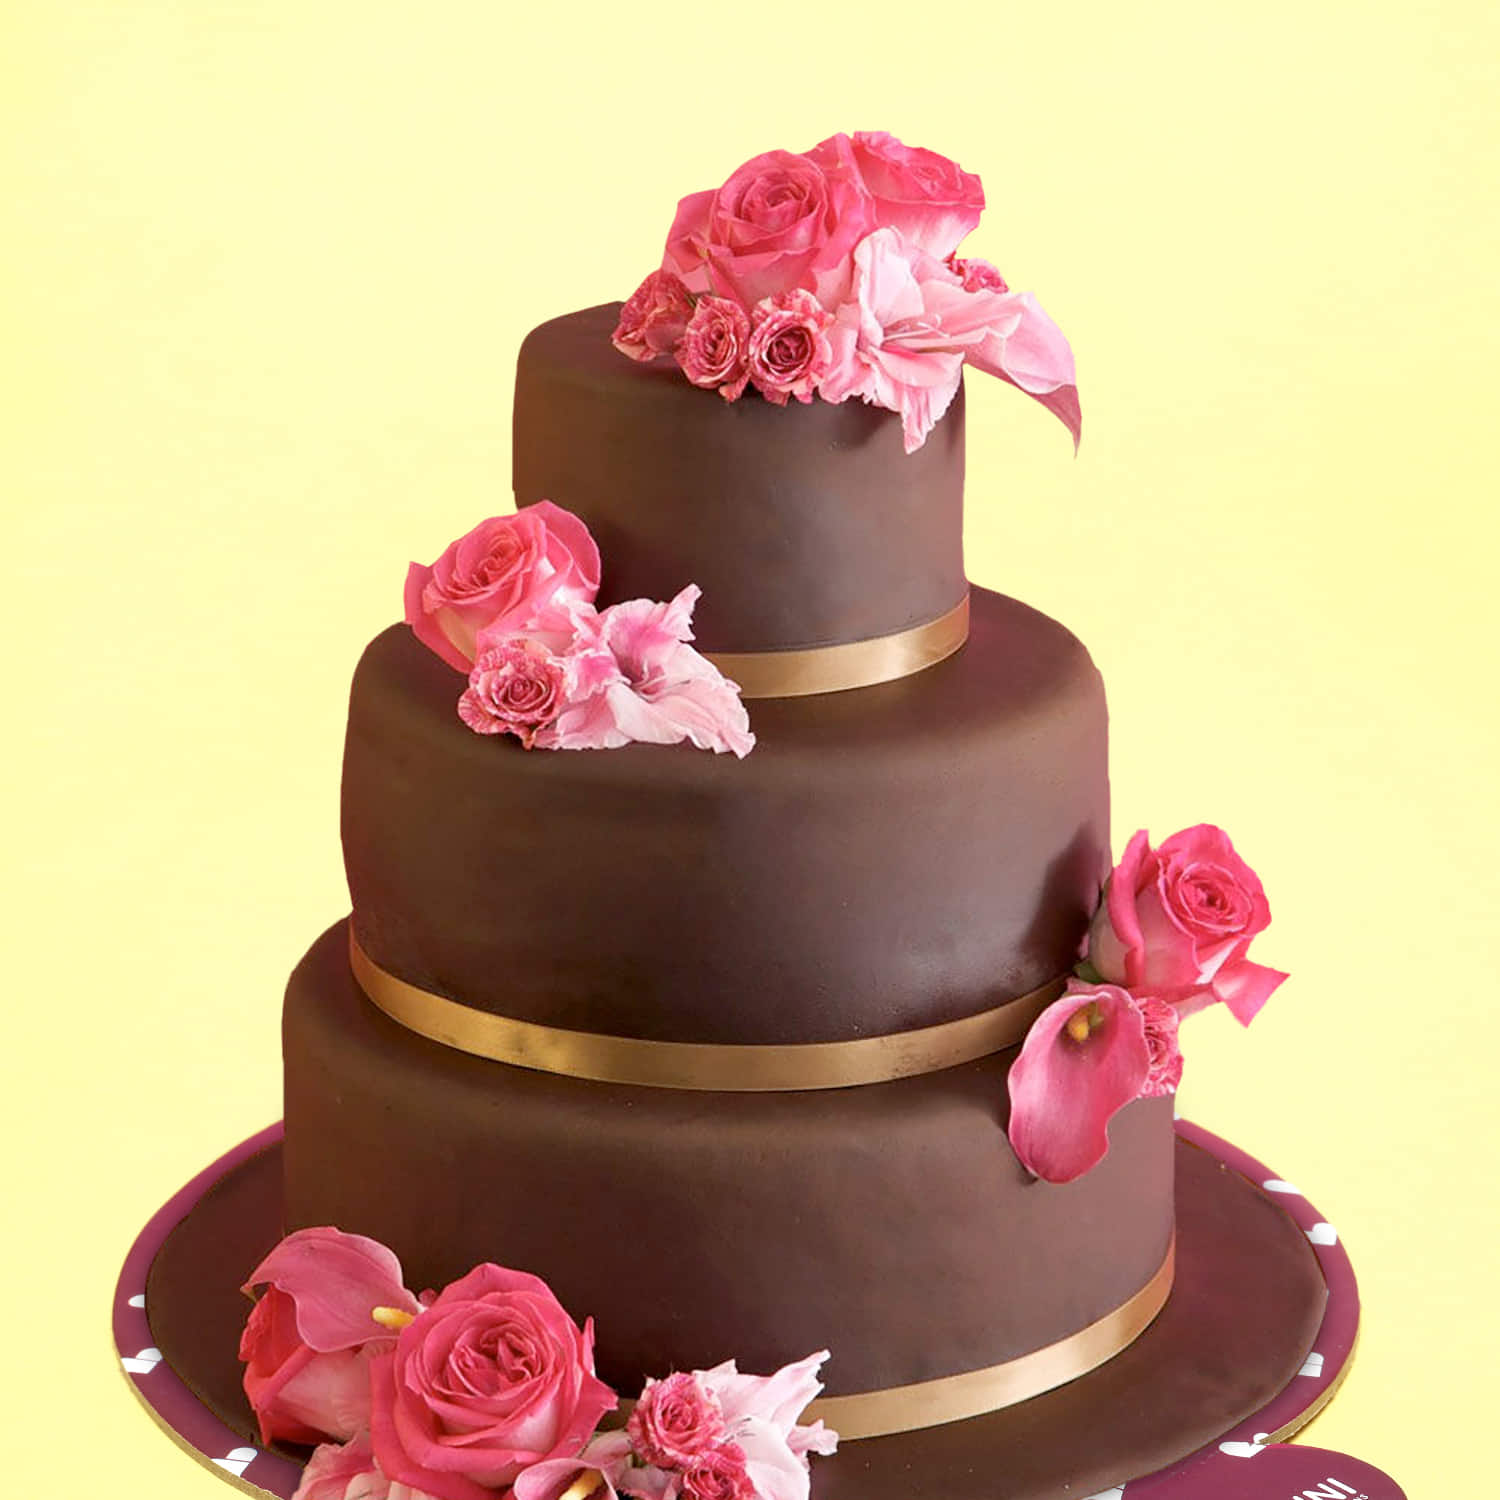 Three Tier Cake with 3 Layer Decorated Chocolate Rose . Stock Photo - Image  of food, dish: 85066656